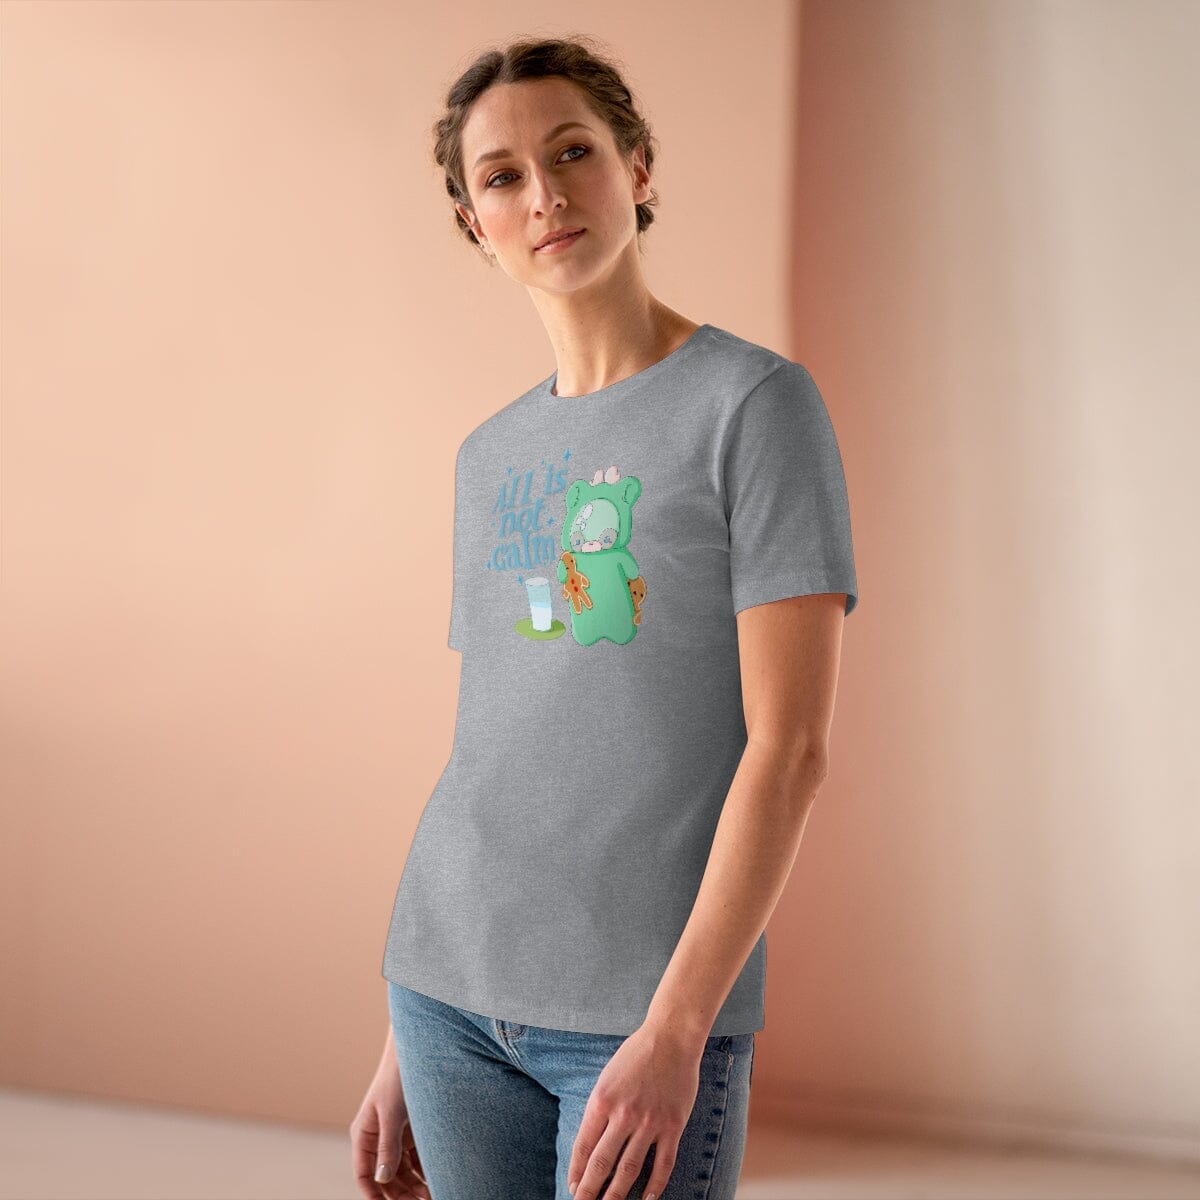 The Griswold Women's Tee